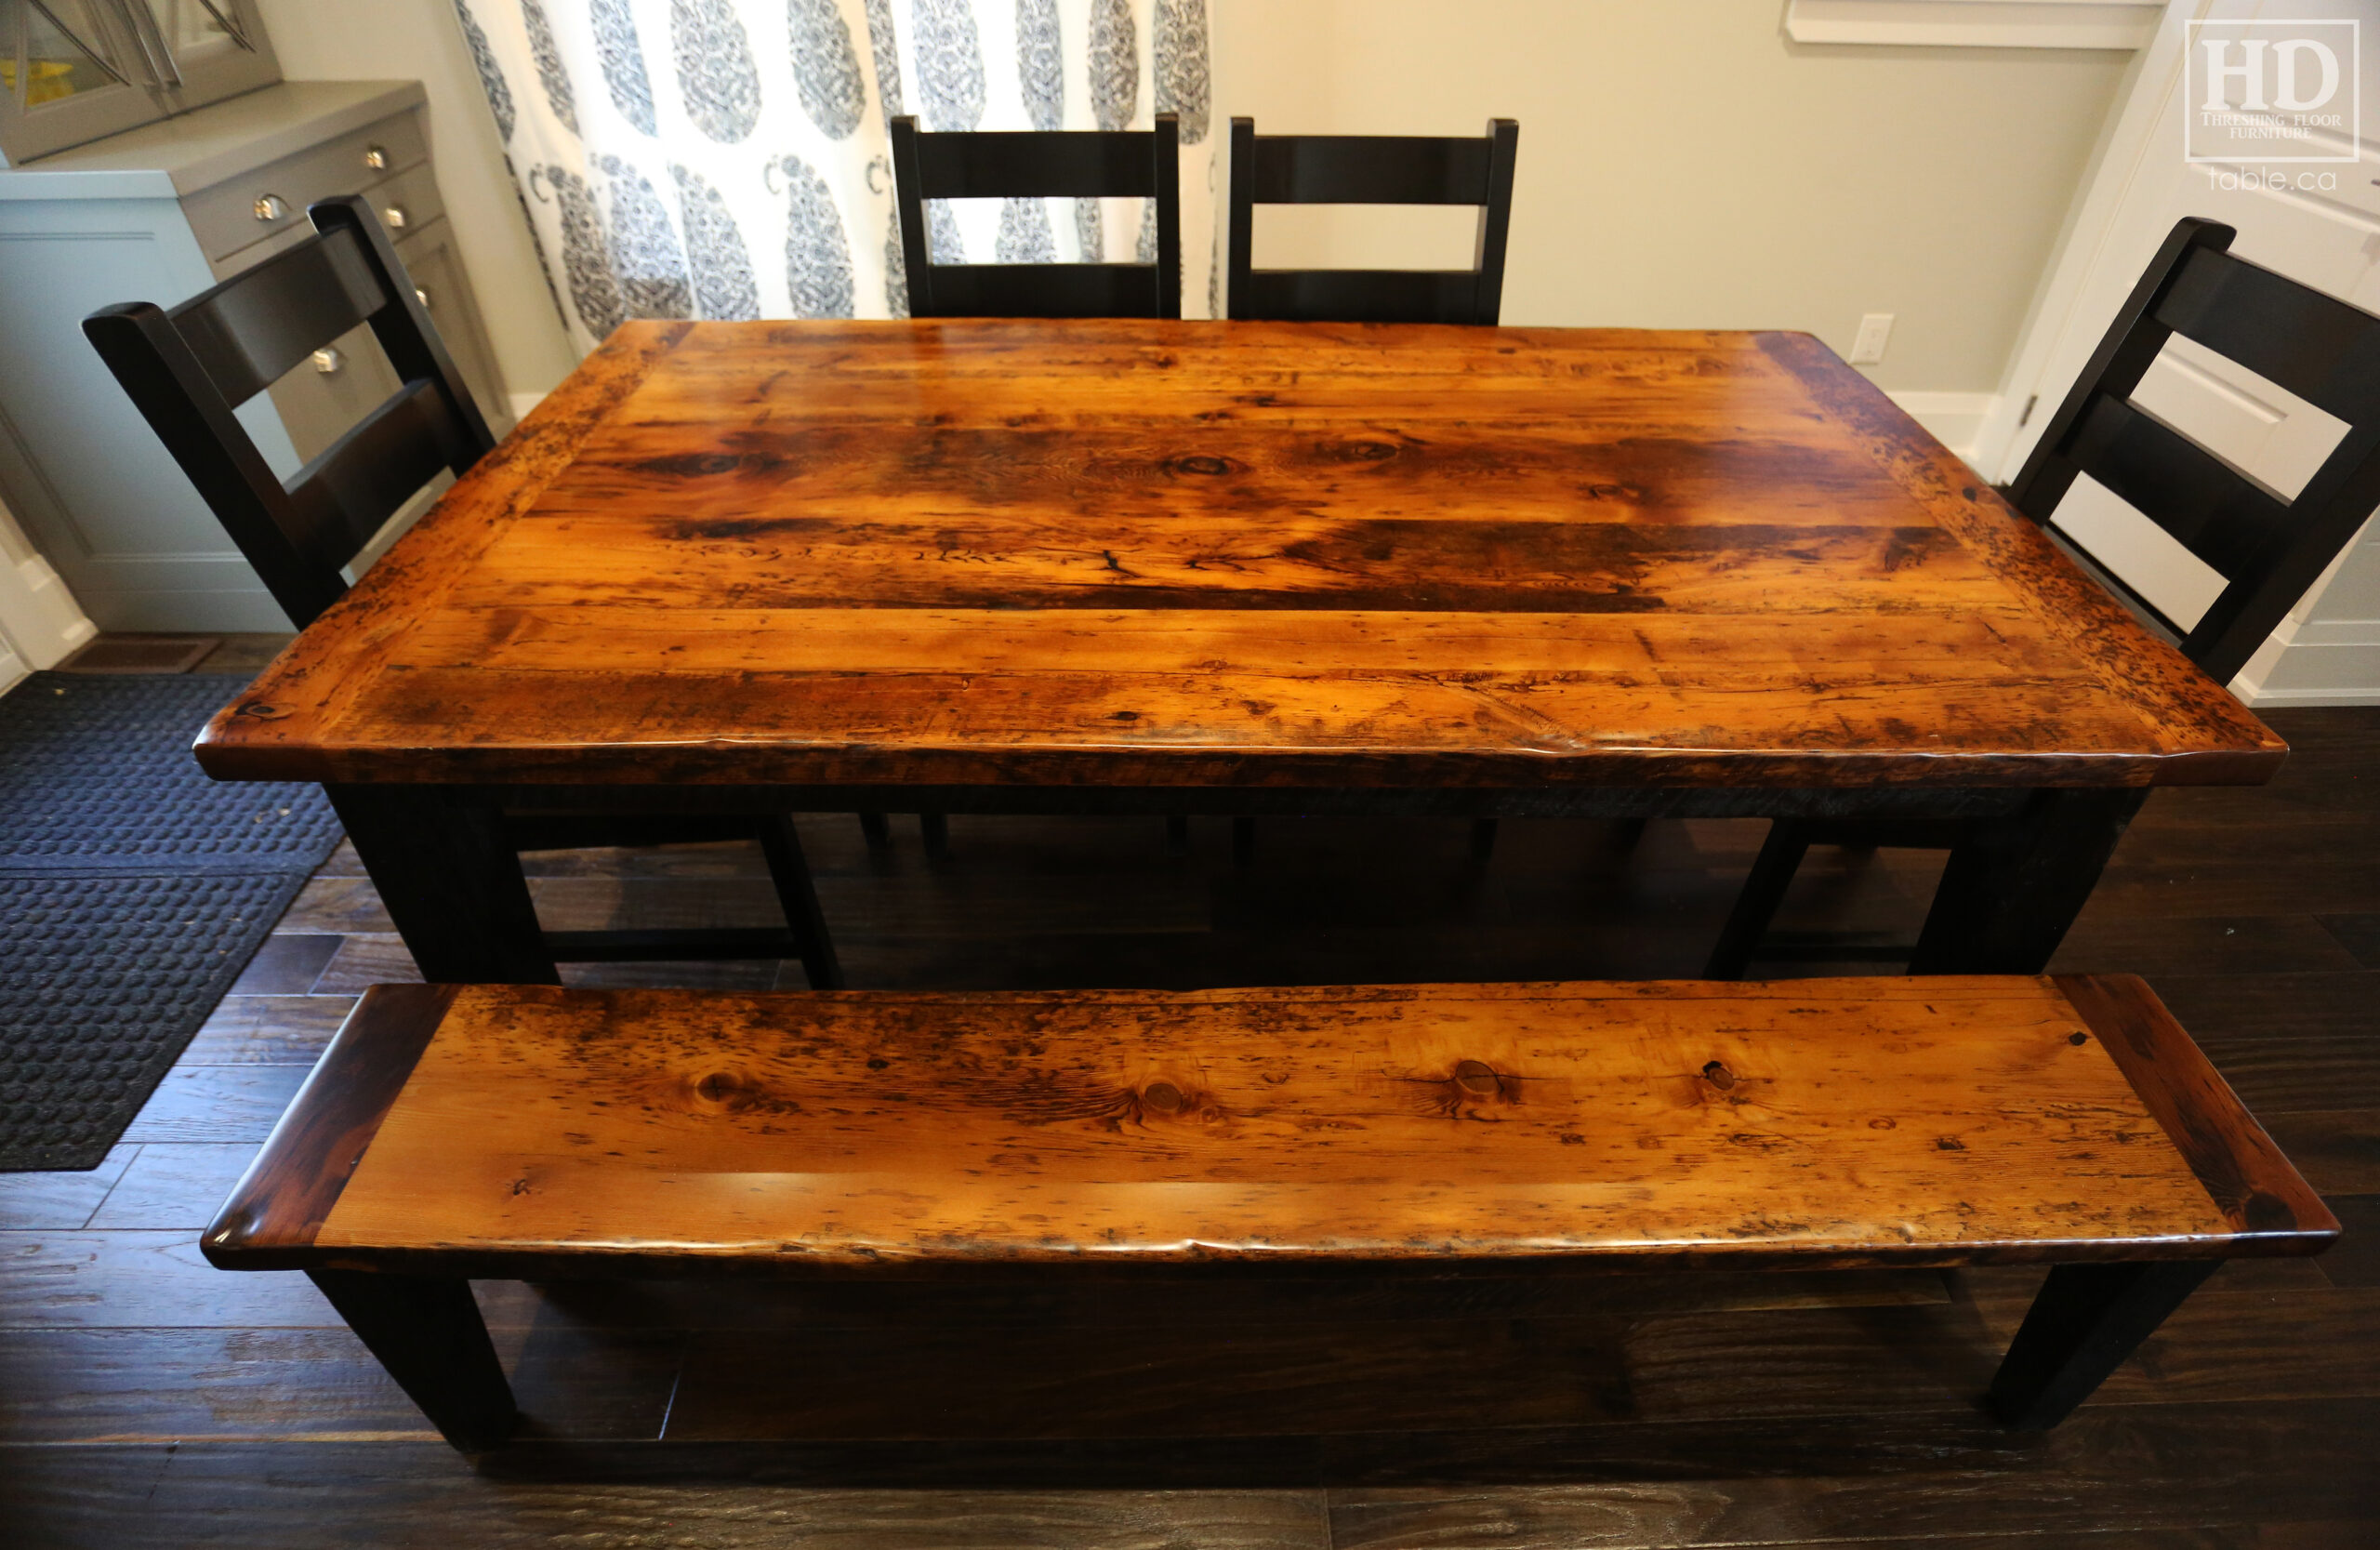 6' Reclaimed Ontario Barnwood Table we made for a Brampton home - 42" deep - Harvest Base: Tapered Windbrace Beam Legs - Black Painted Base - Old Growth Hemlock Threshing Floor Construction - Original edges & distressing maintained - Premium epoxy + satin polyurethane finish â€“ 6' [matching] Bench - 4 Ladder Back Chairs / Wormy Maple / Black Painted Frame â€“ Seat Stained Colour of Table - www.table.ca